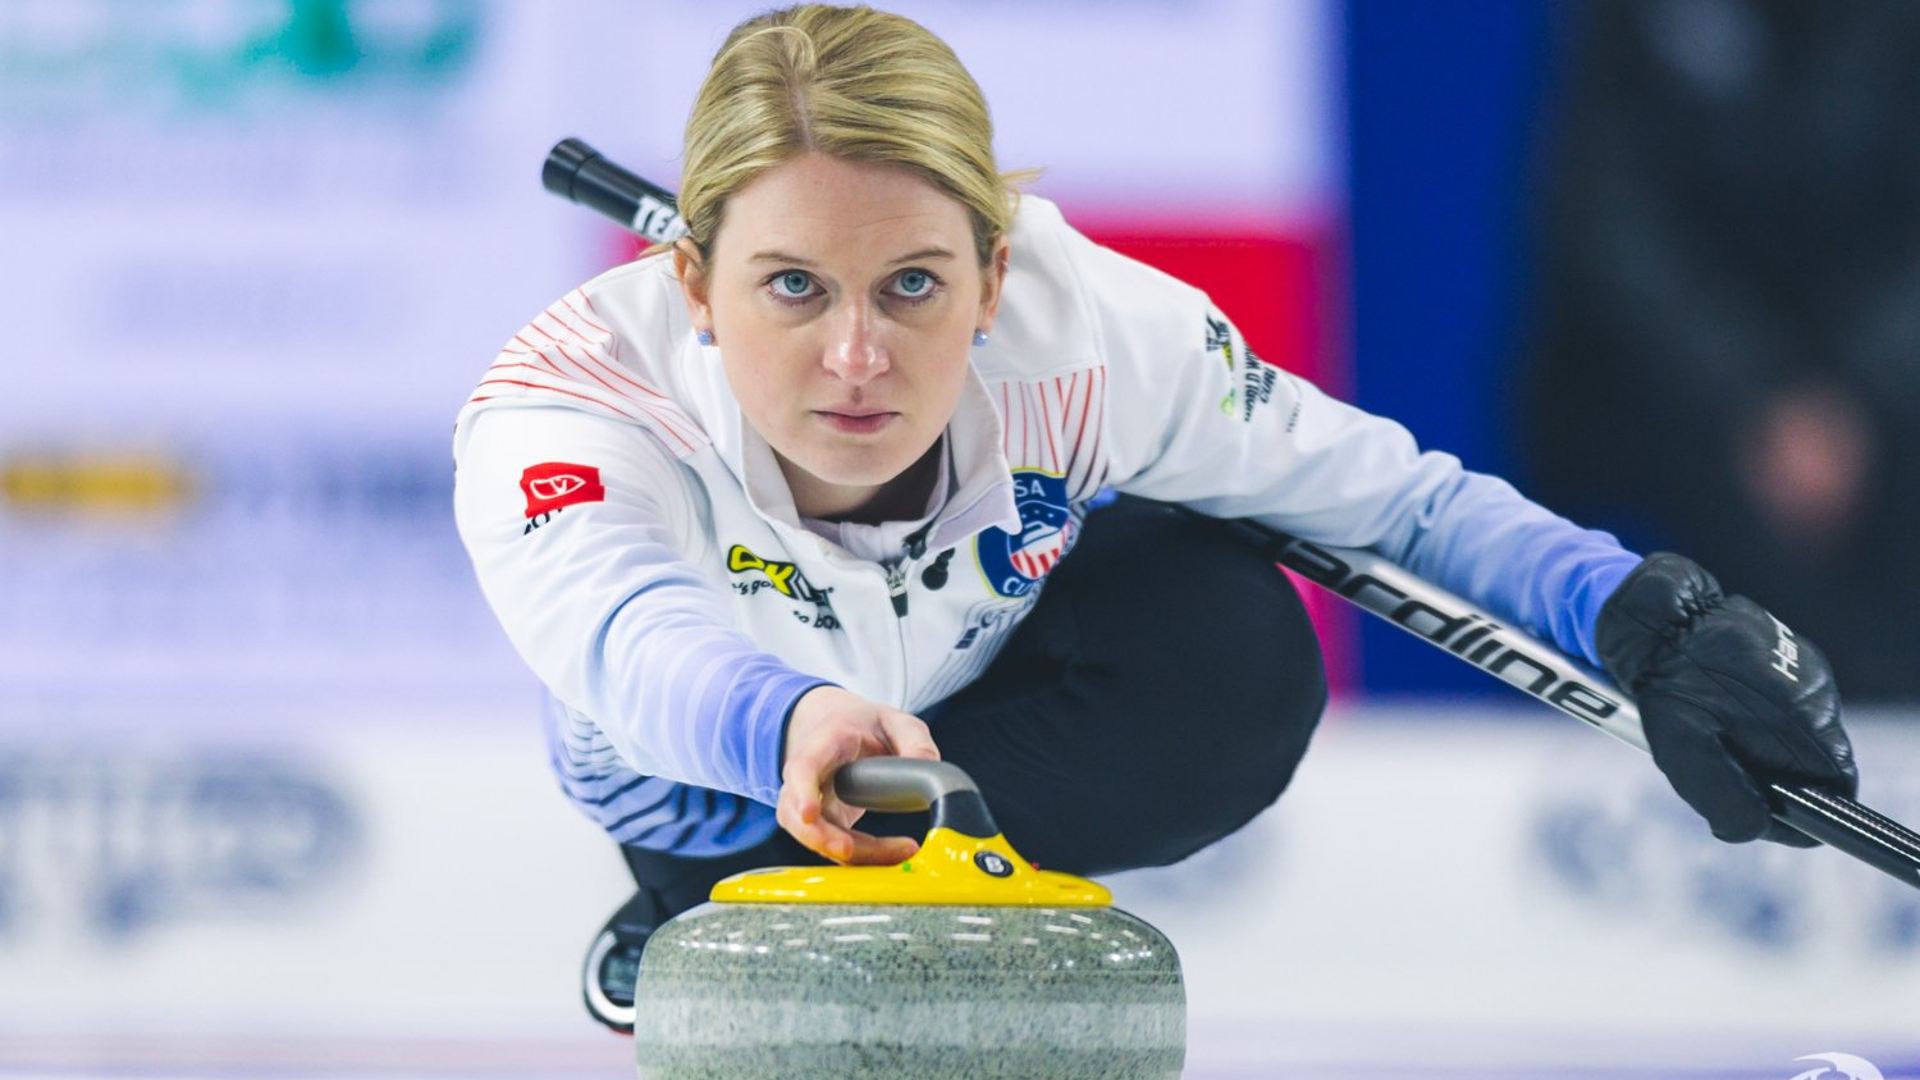 Pan Continental Curling Championships 2022 LIVE Streaming, When and Where to Watch, Schedule